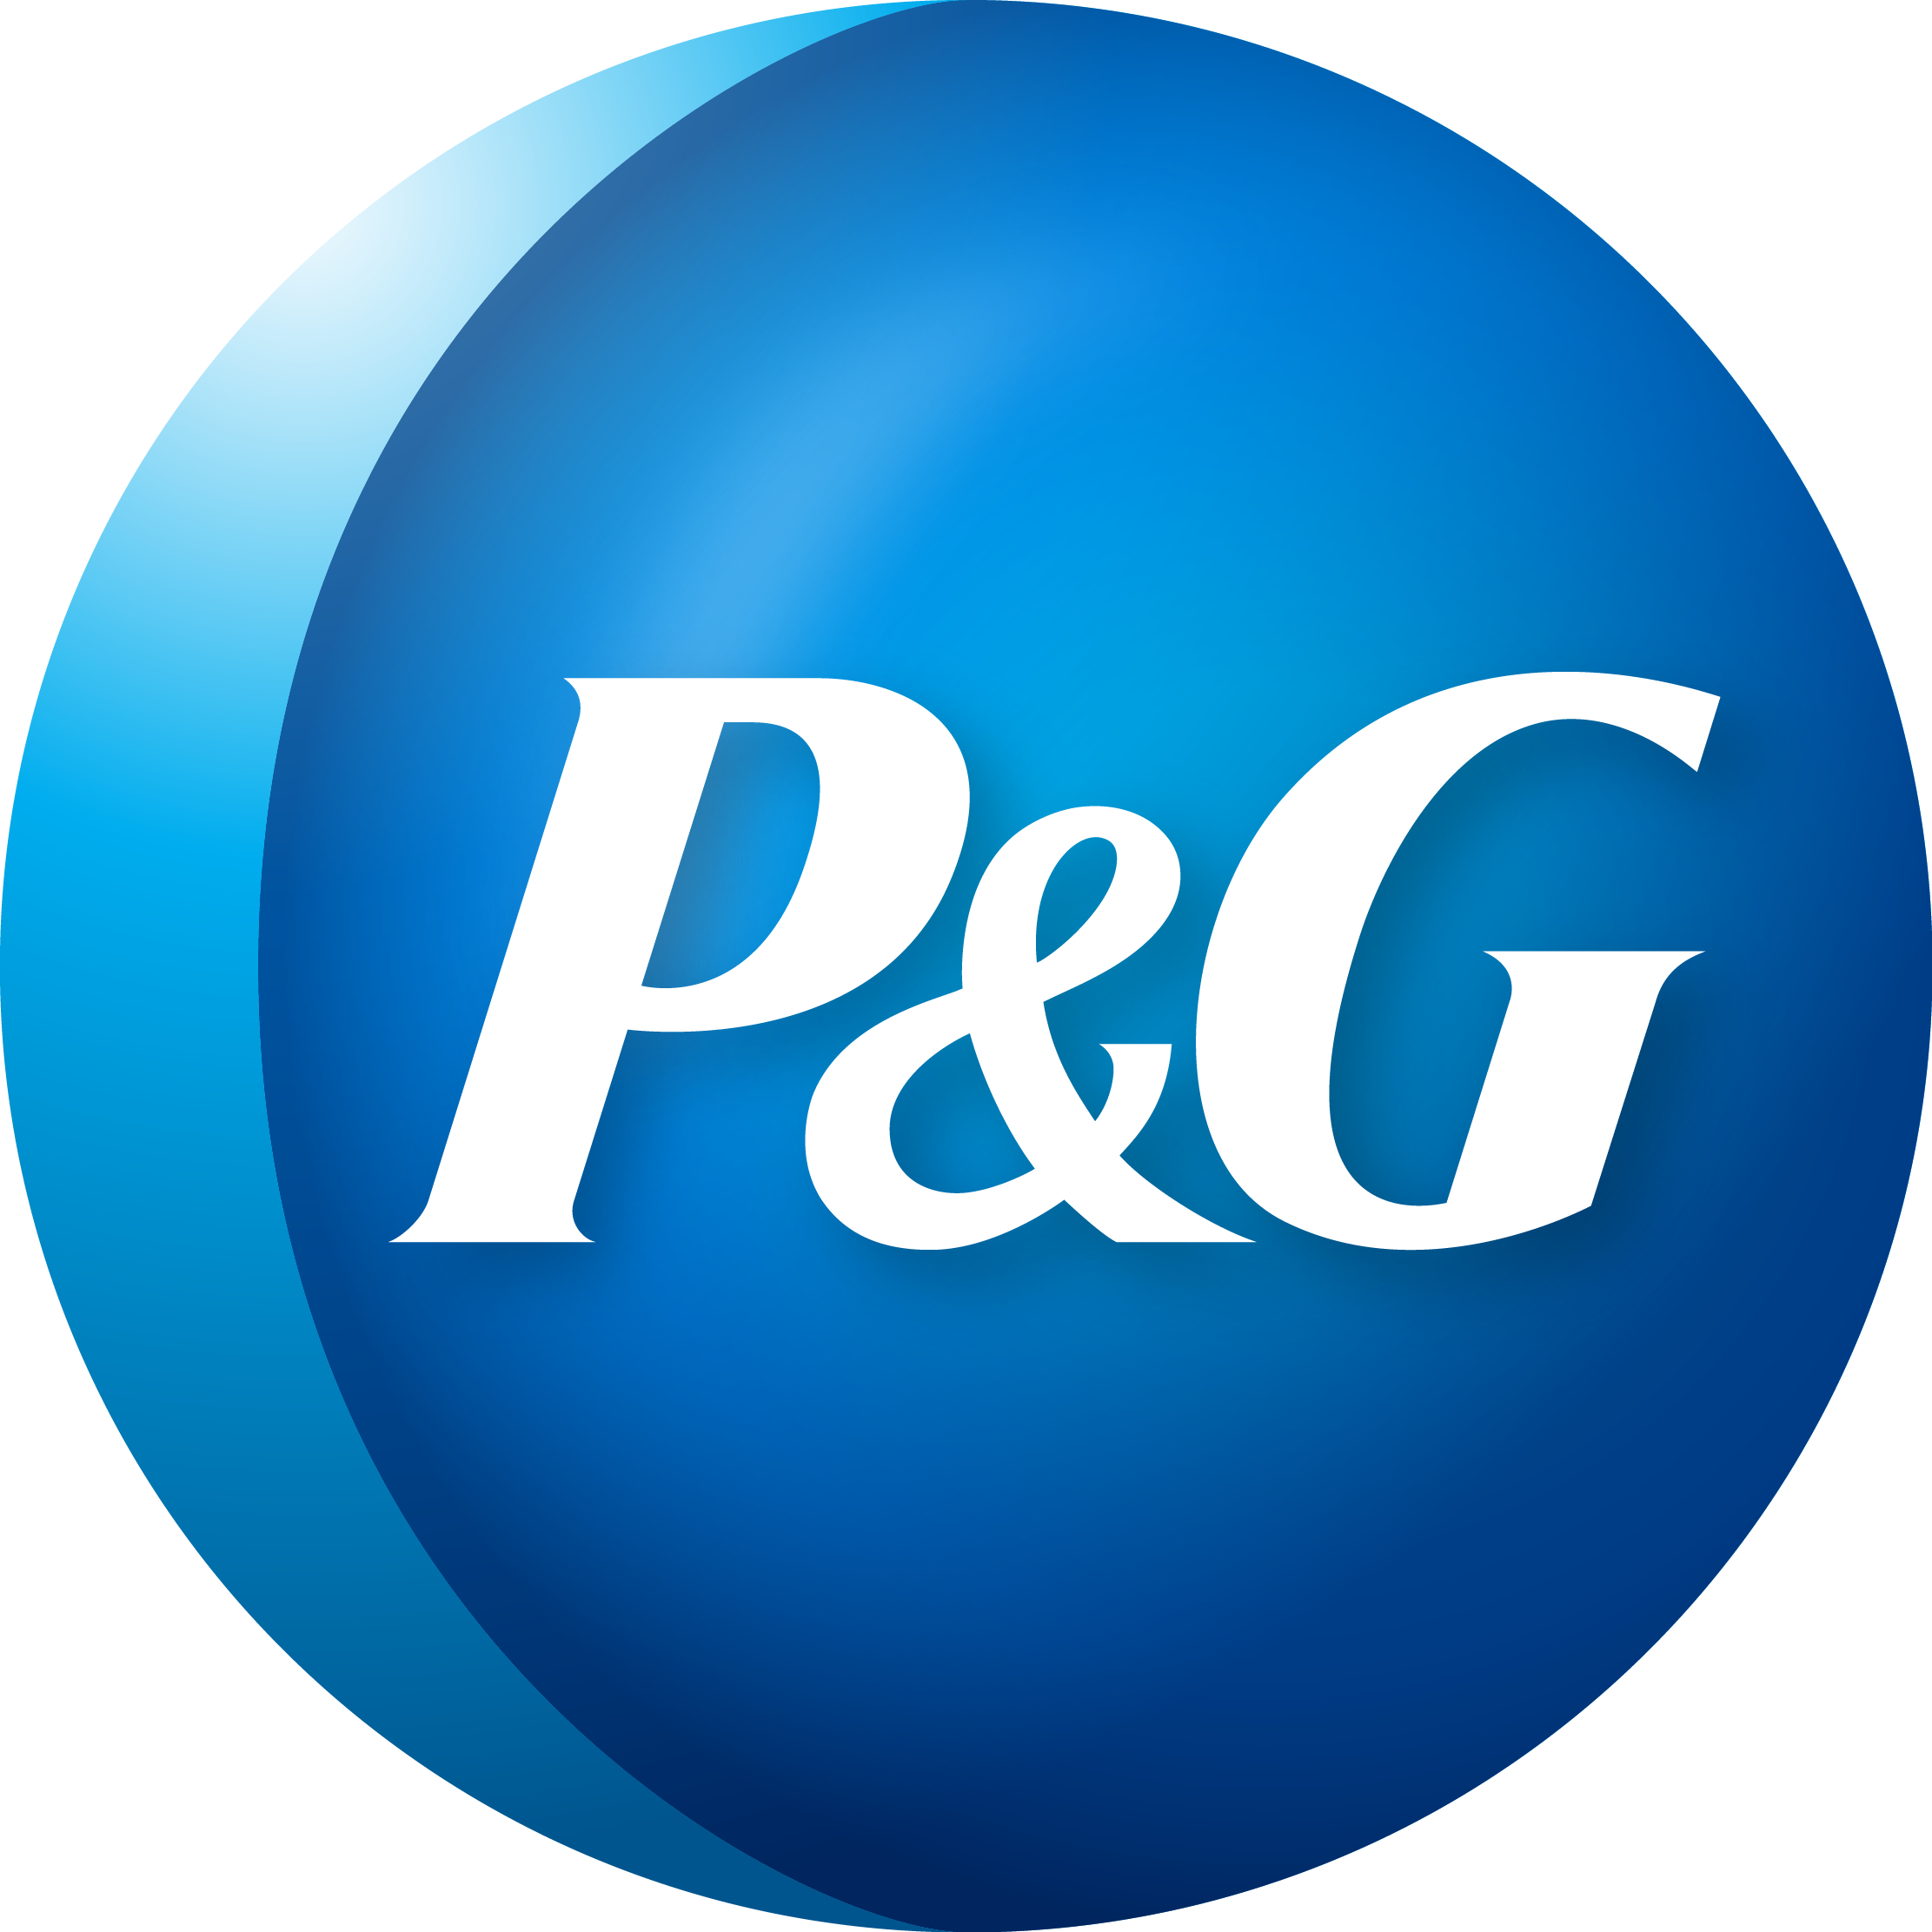 P&G to Acquire Merck Consumer Health Business, Including Vitamin and Dietary Supplement Brands in Europe, Asia, and Latin America